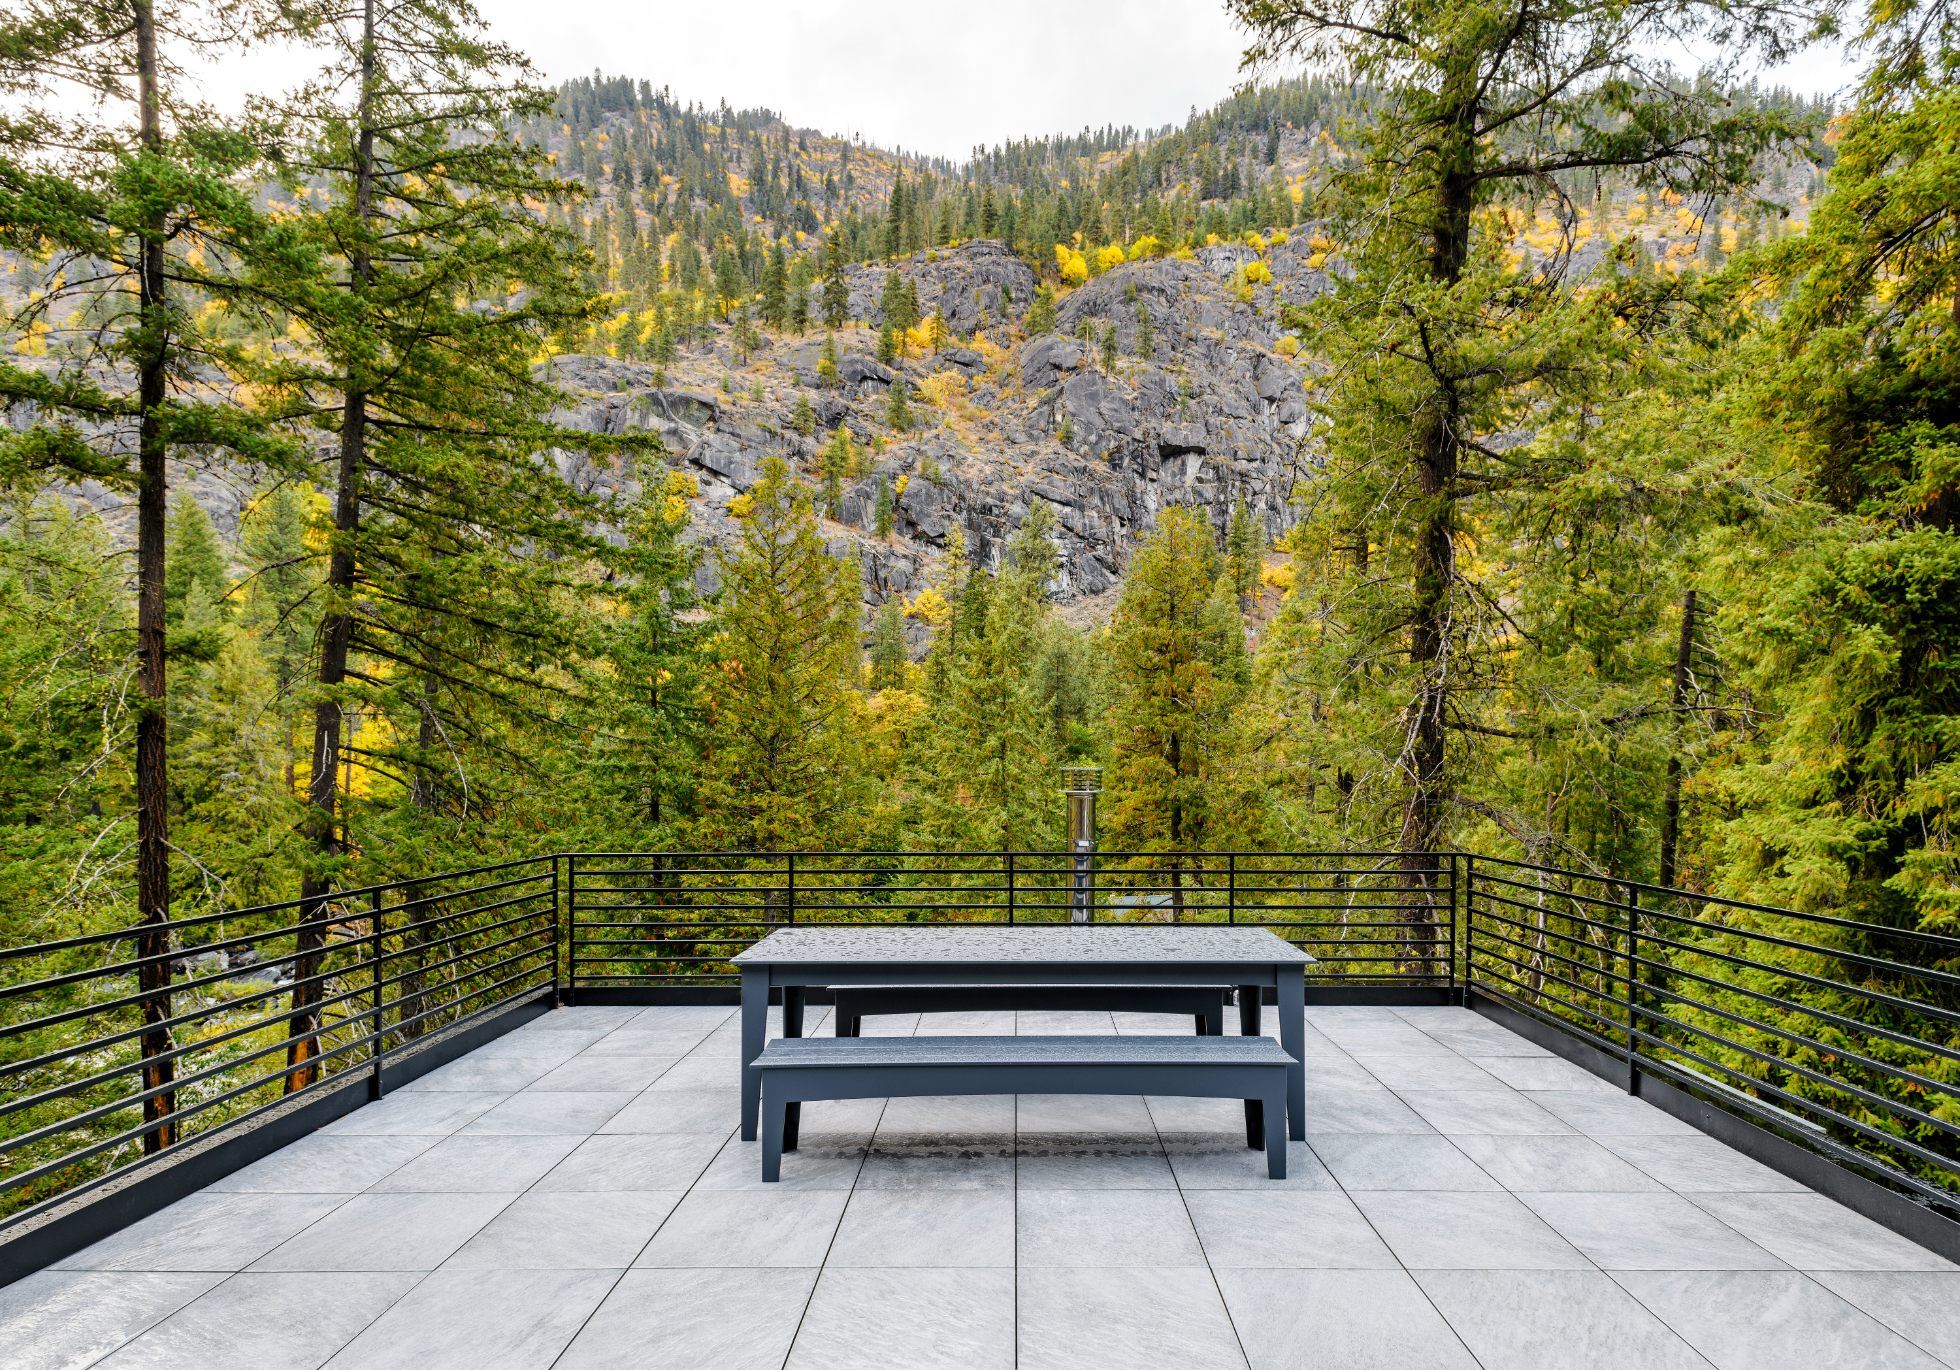 A roof deck expands the living space of the roughly 1,000-square-feet cabin.